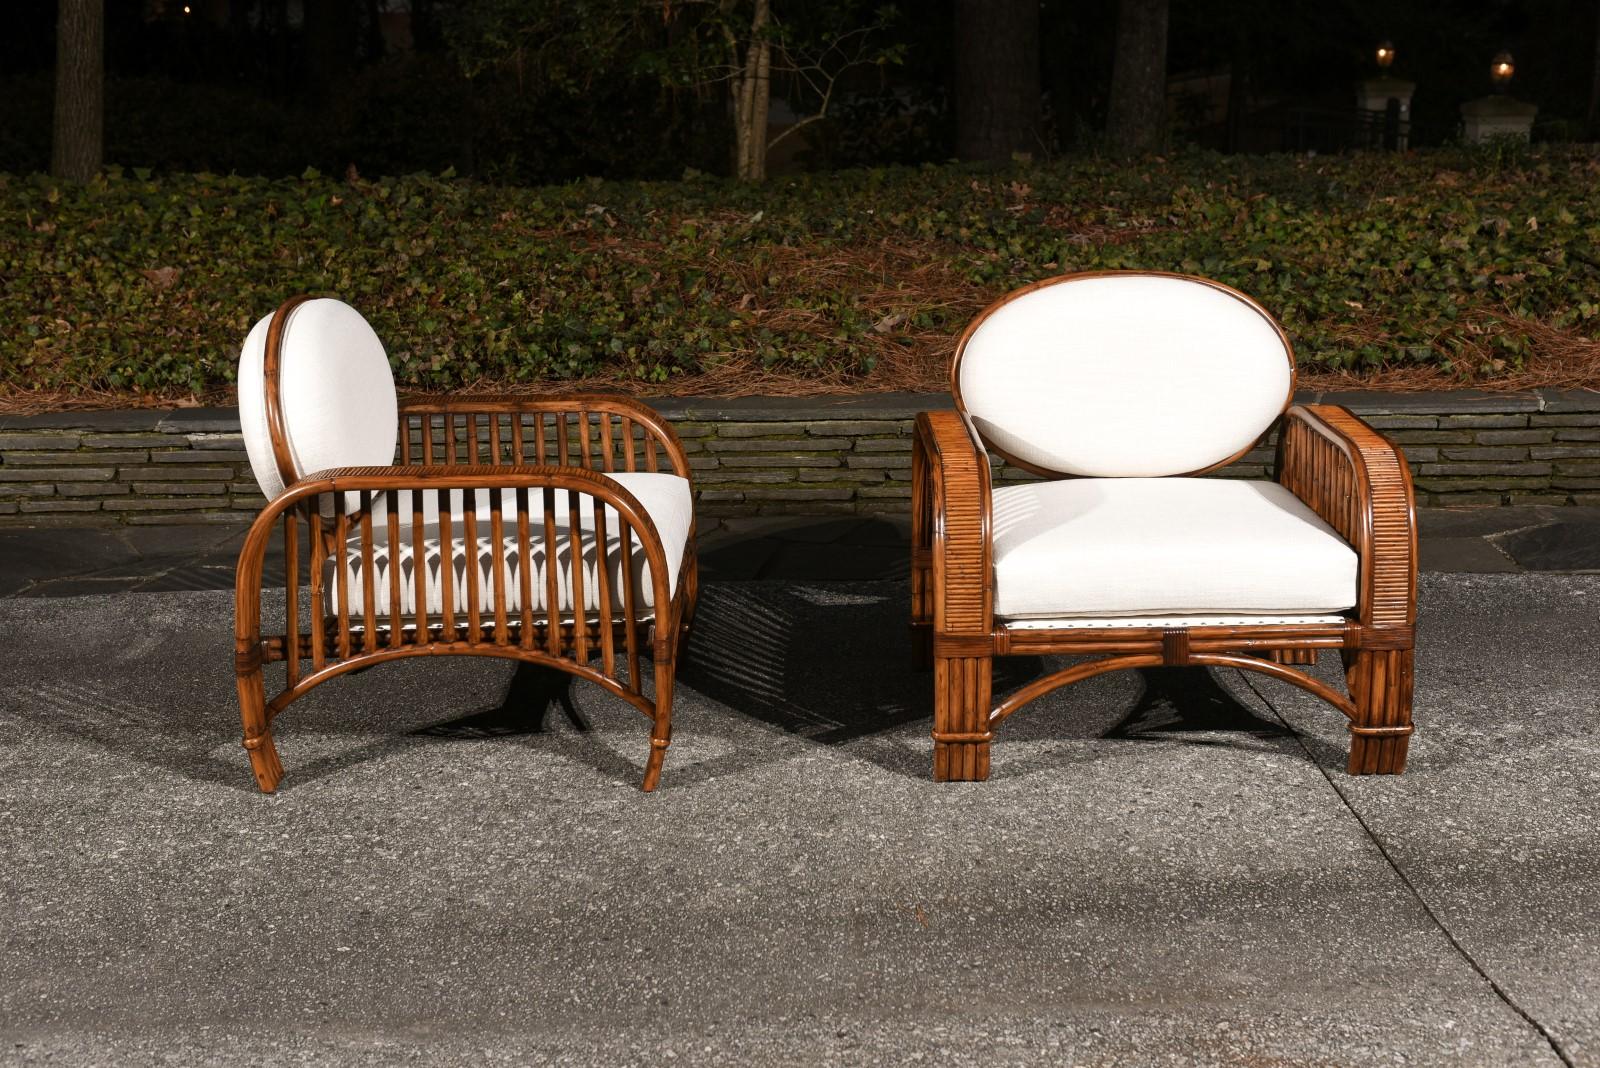 Leather Striking Pair of Art Deco Influenced Club Chairs by Brown Jordan, circa 1980 For Sale